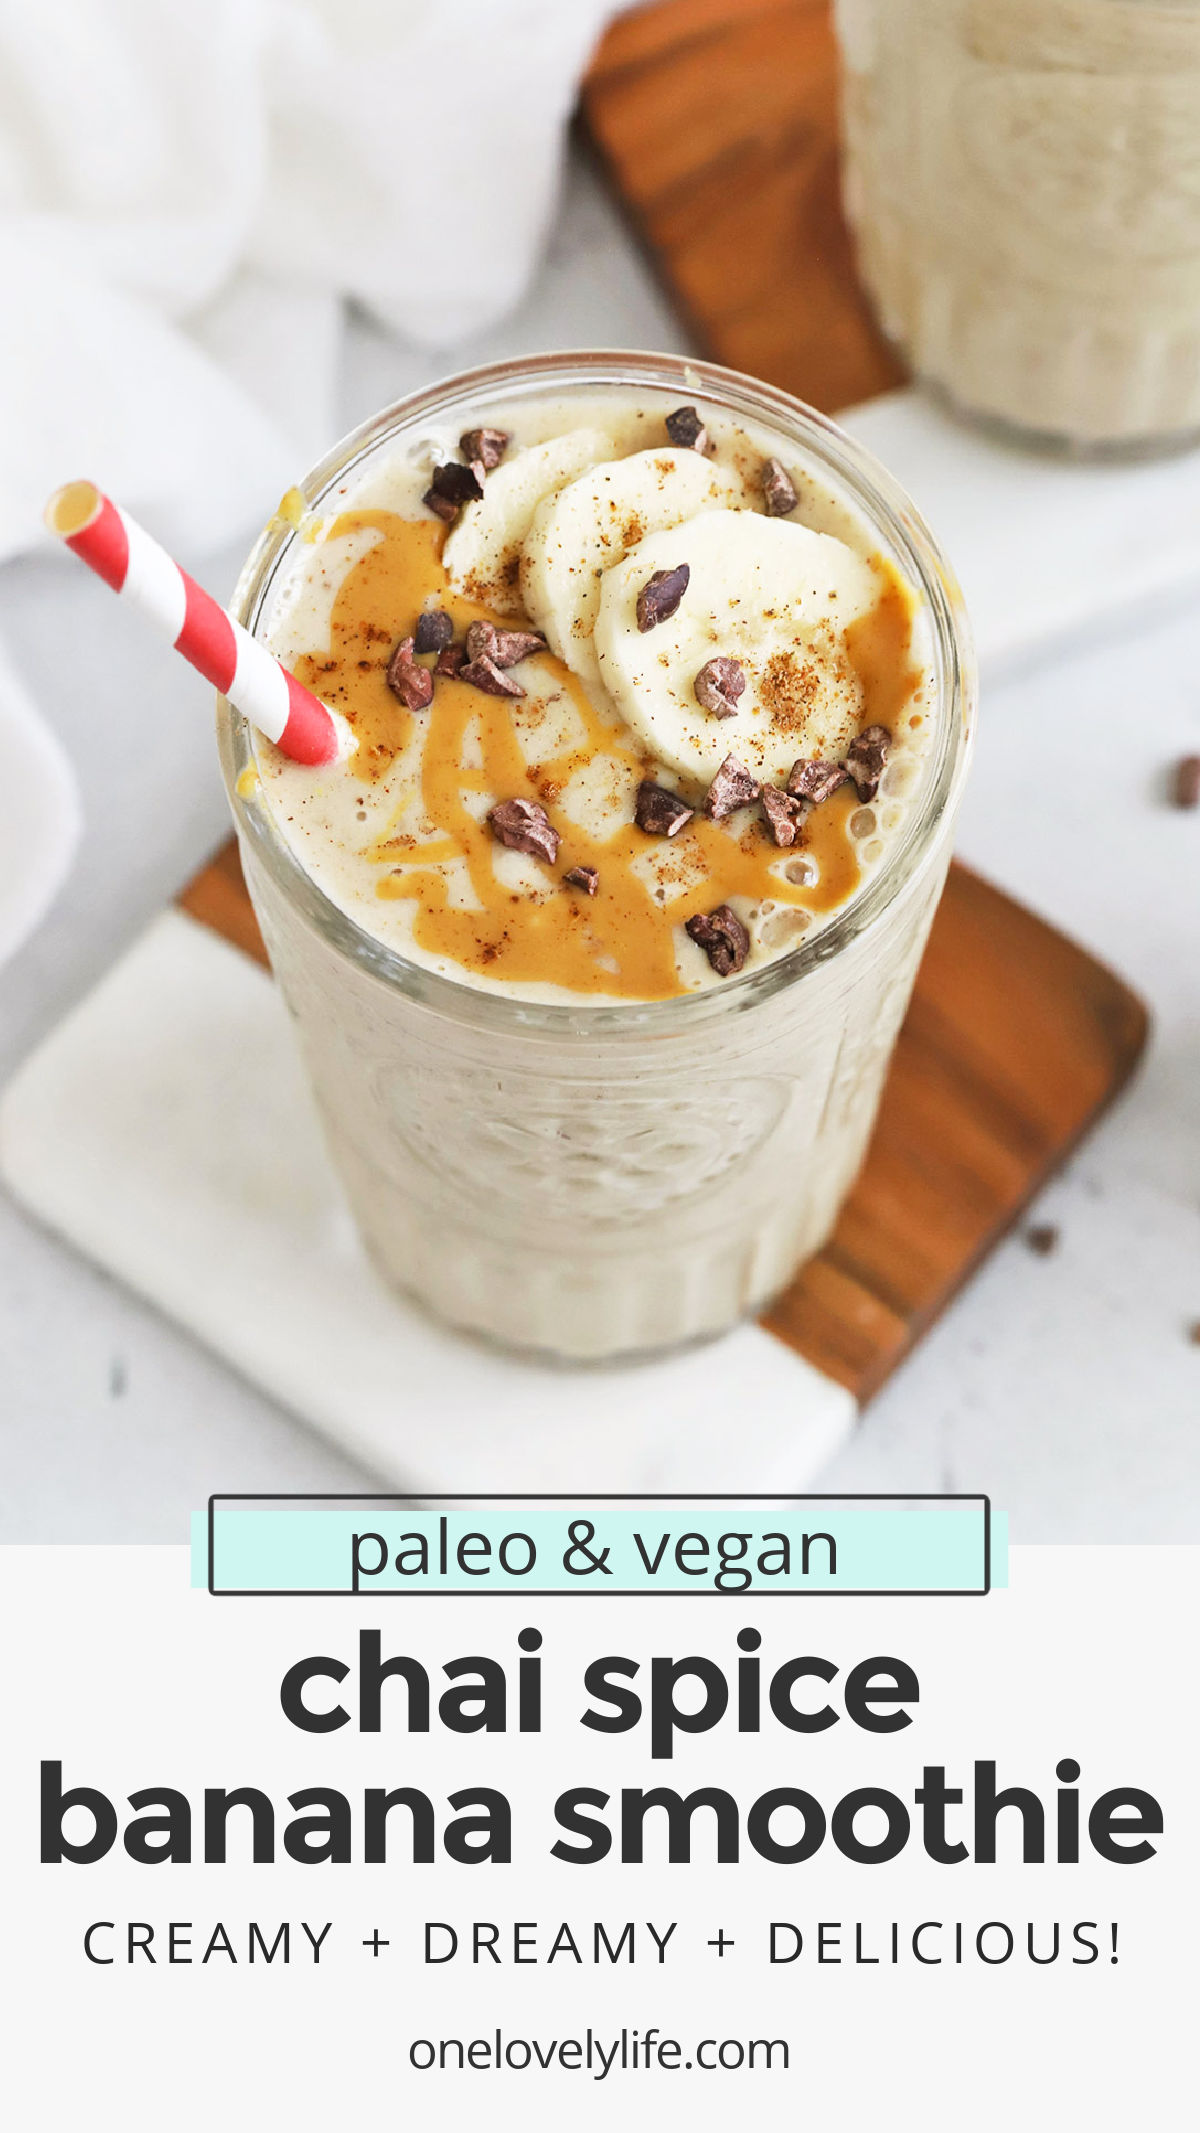 Chai Spiced Banana Smoothies - This chai banana smoothie is such a yummy change of pace! It's perfect all year long. (Paleo, Vegan) // Chai Spice Banana Smoothie // Banana Smoothie Recipe // Banana Chai Smoothie // Fall Smoothie // Winter Smoothie // Paleo Smoothie // Vegan Smoothie